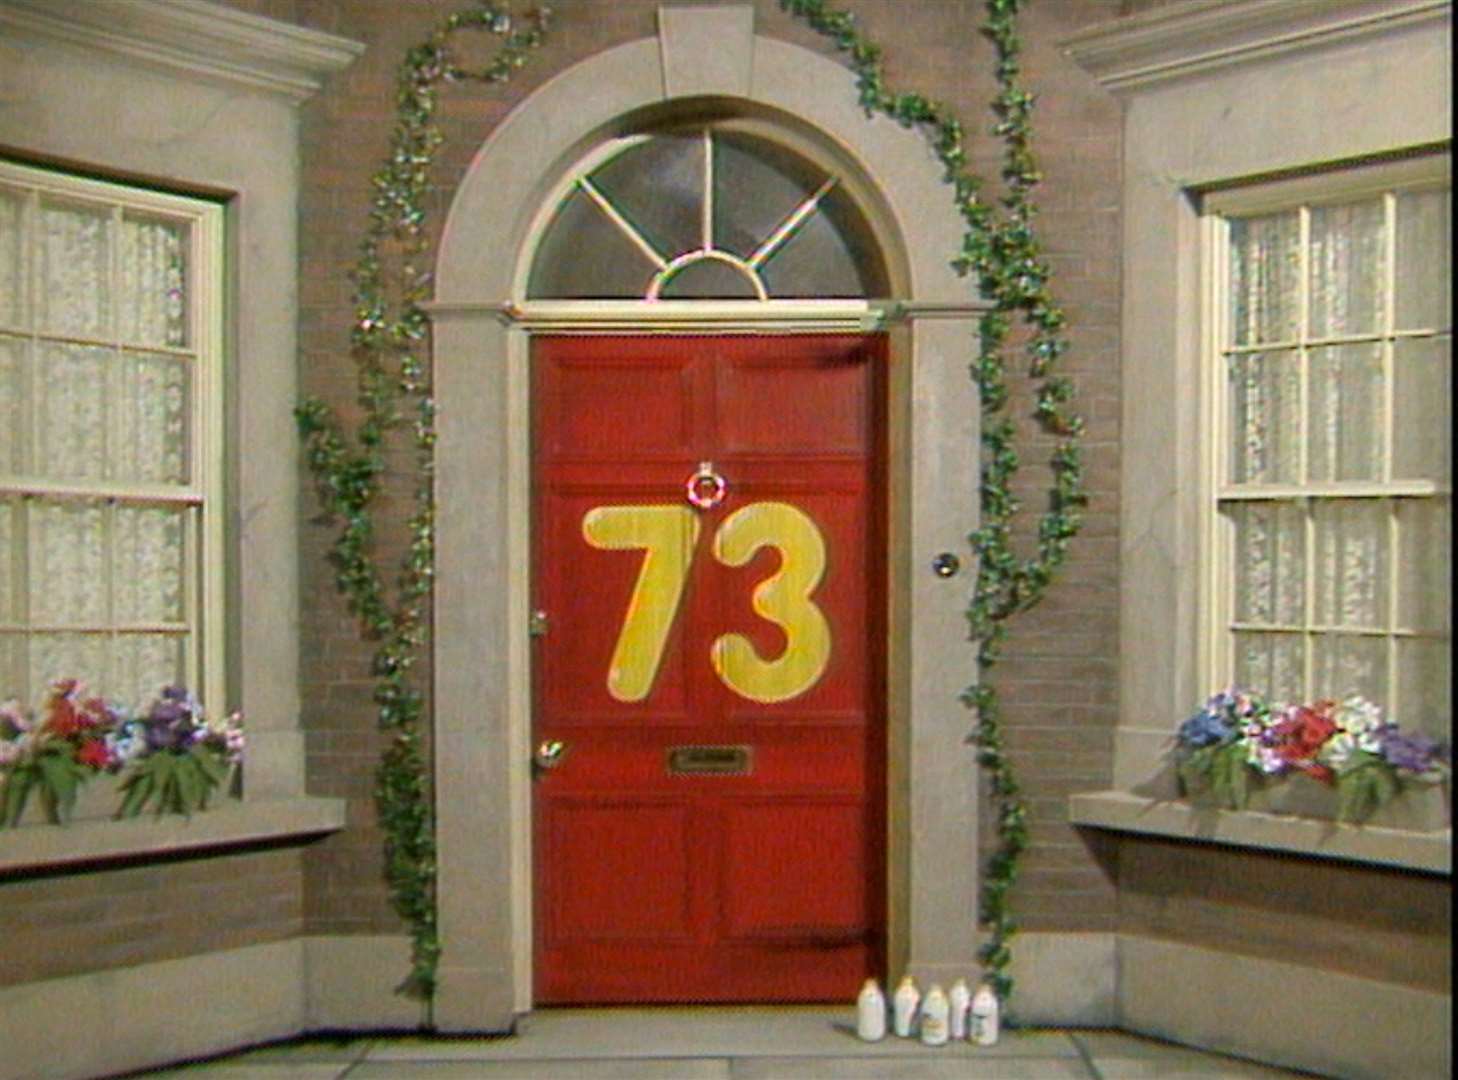 The front door of Saturday morning children's show Number 73 made by TVS at VInters Park studios, Maidstone